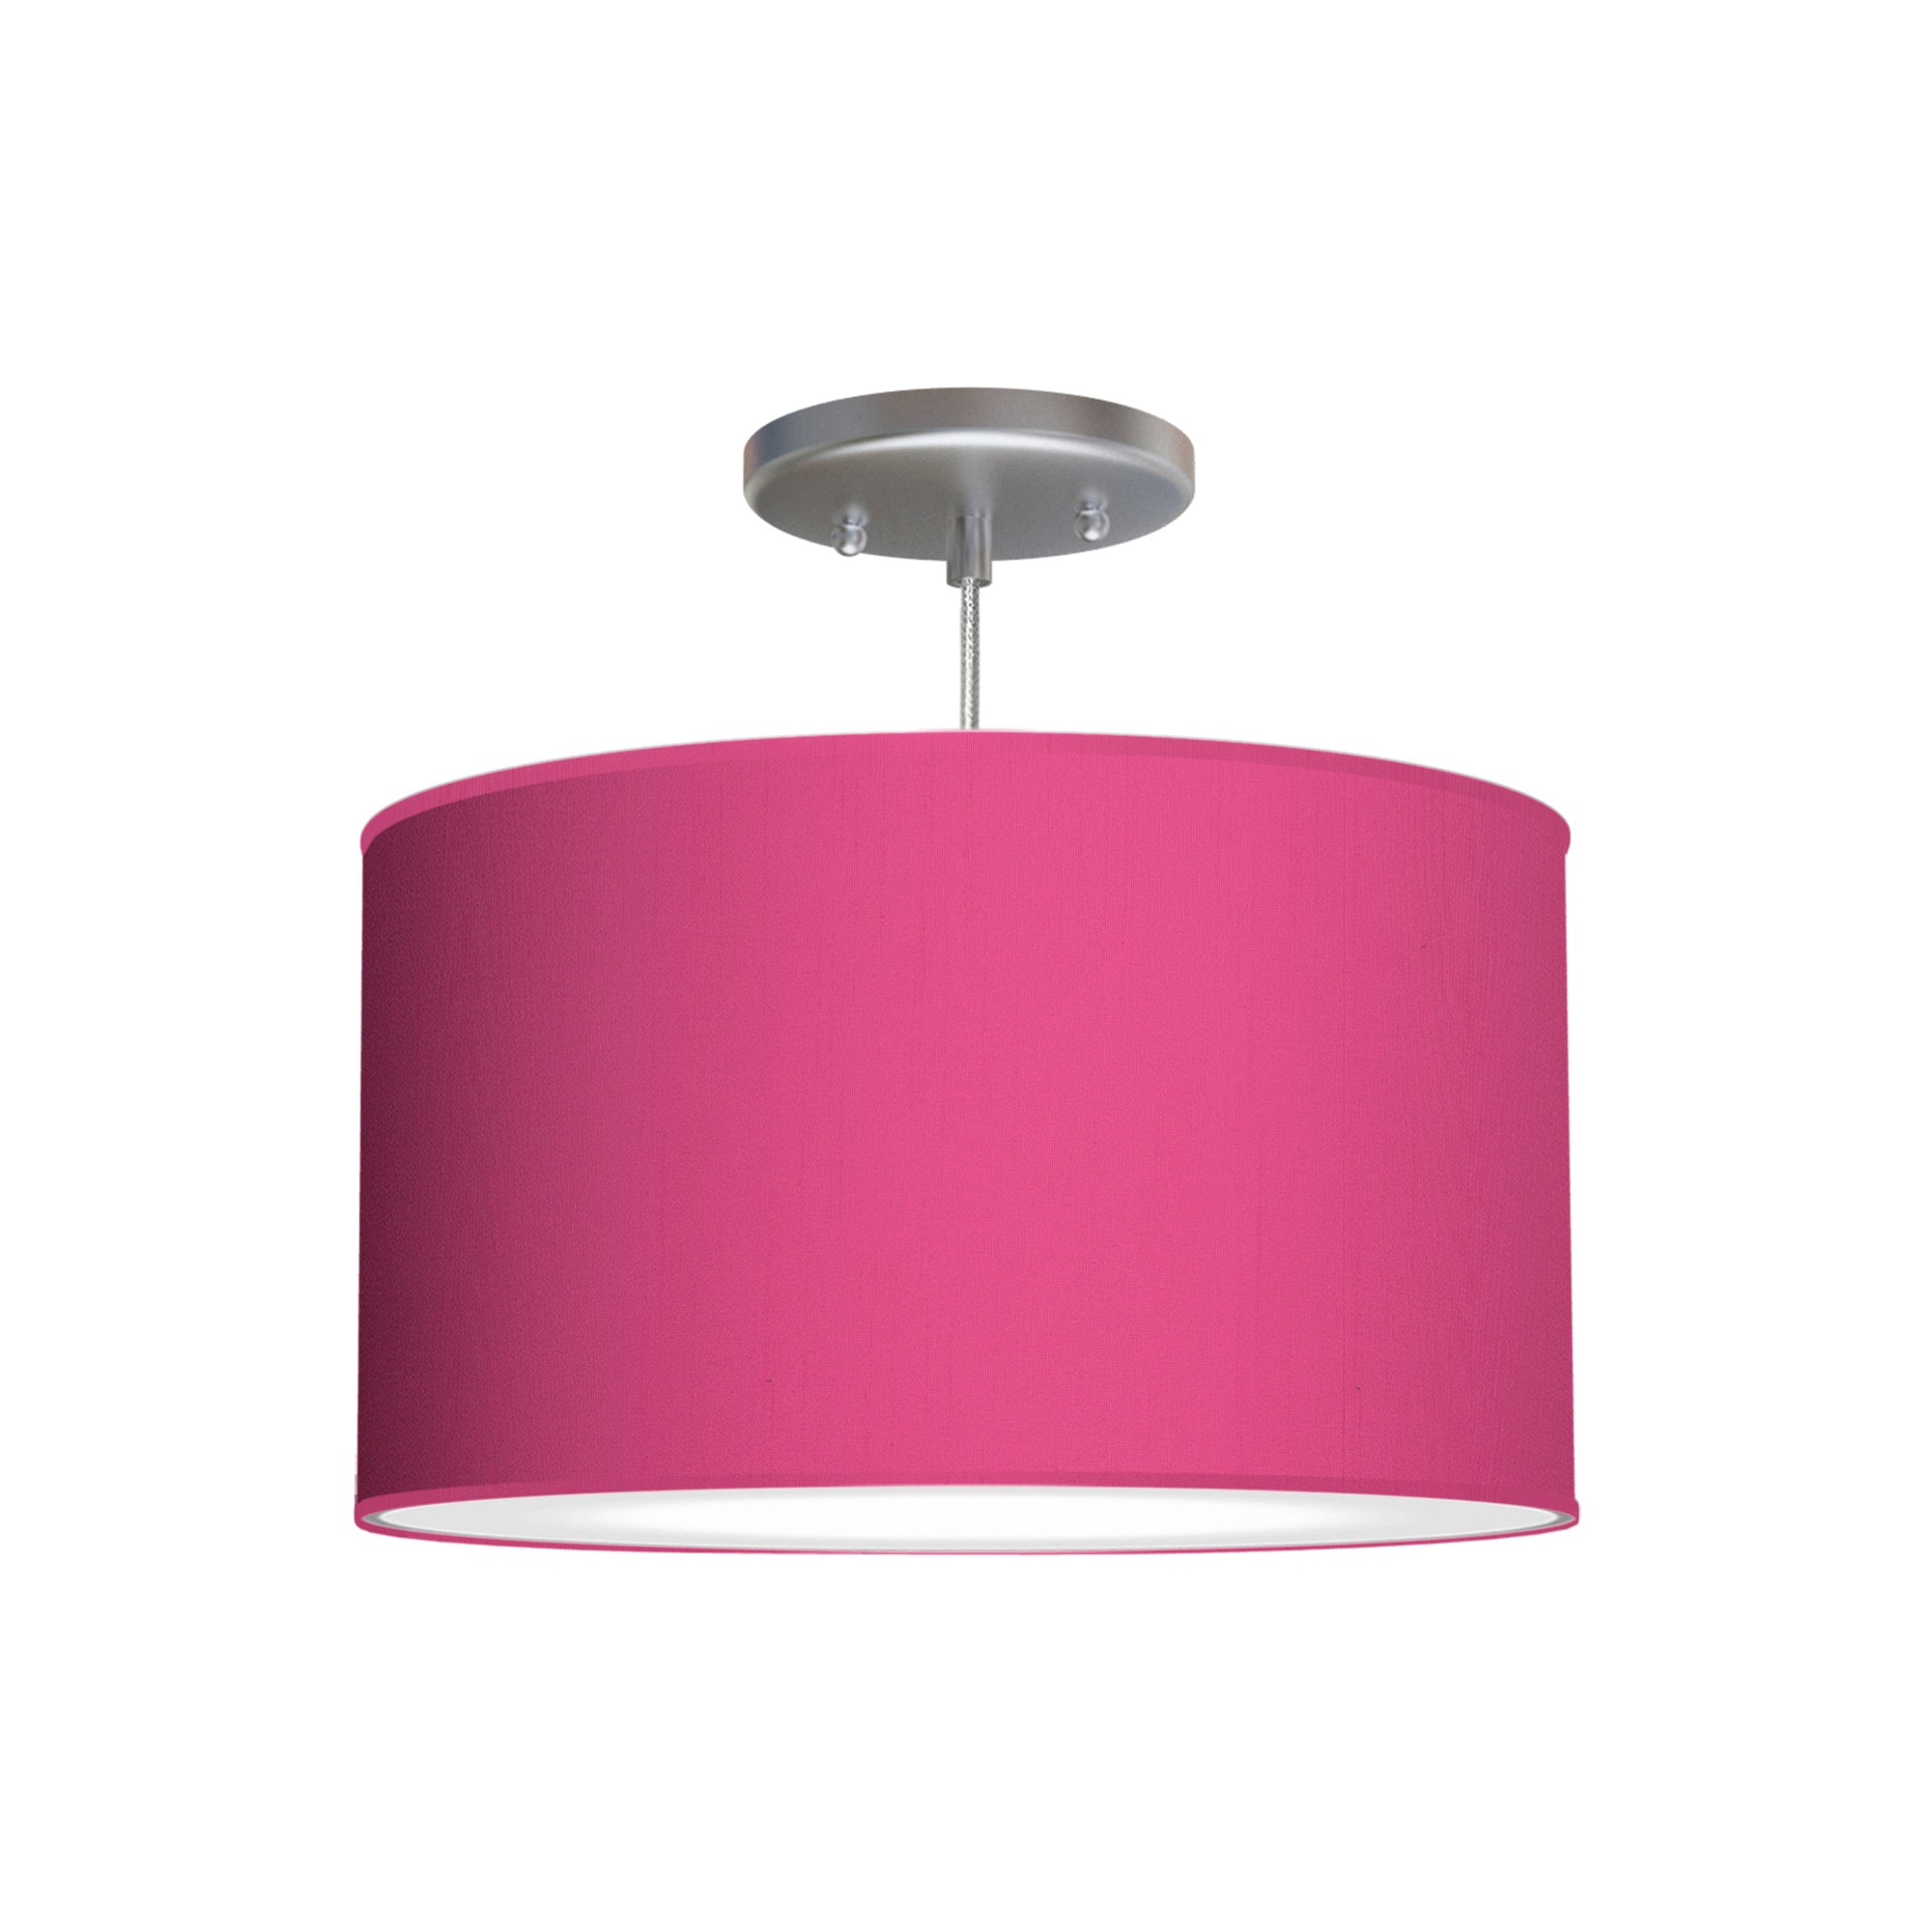 The Gab Hanging Lamp from Seascape Fixtures with a silk shade in berry color.